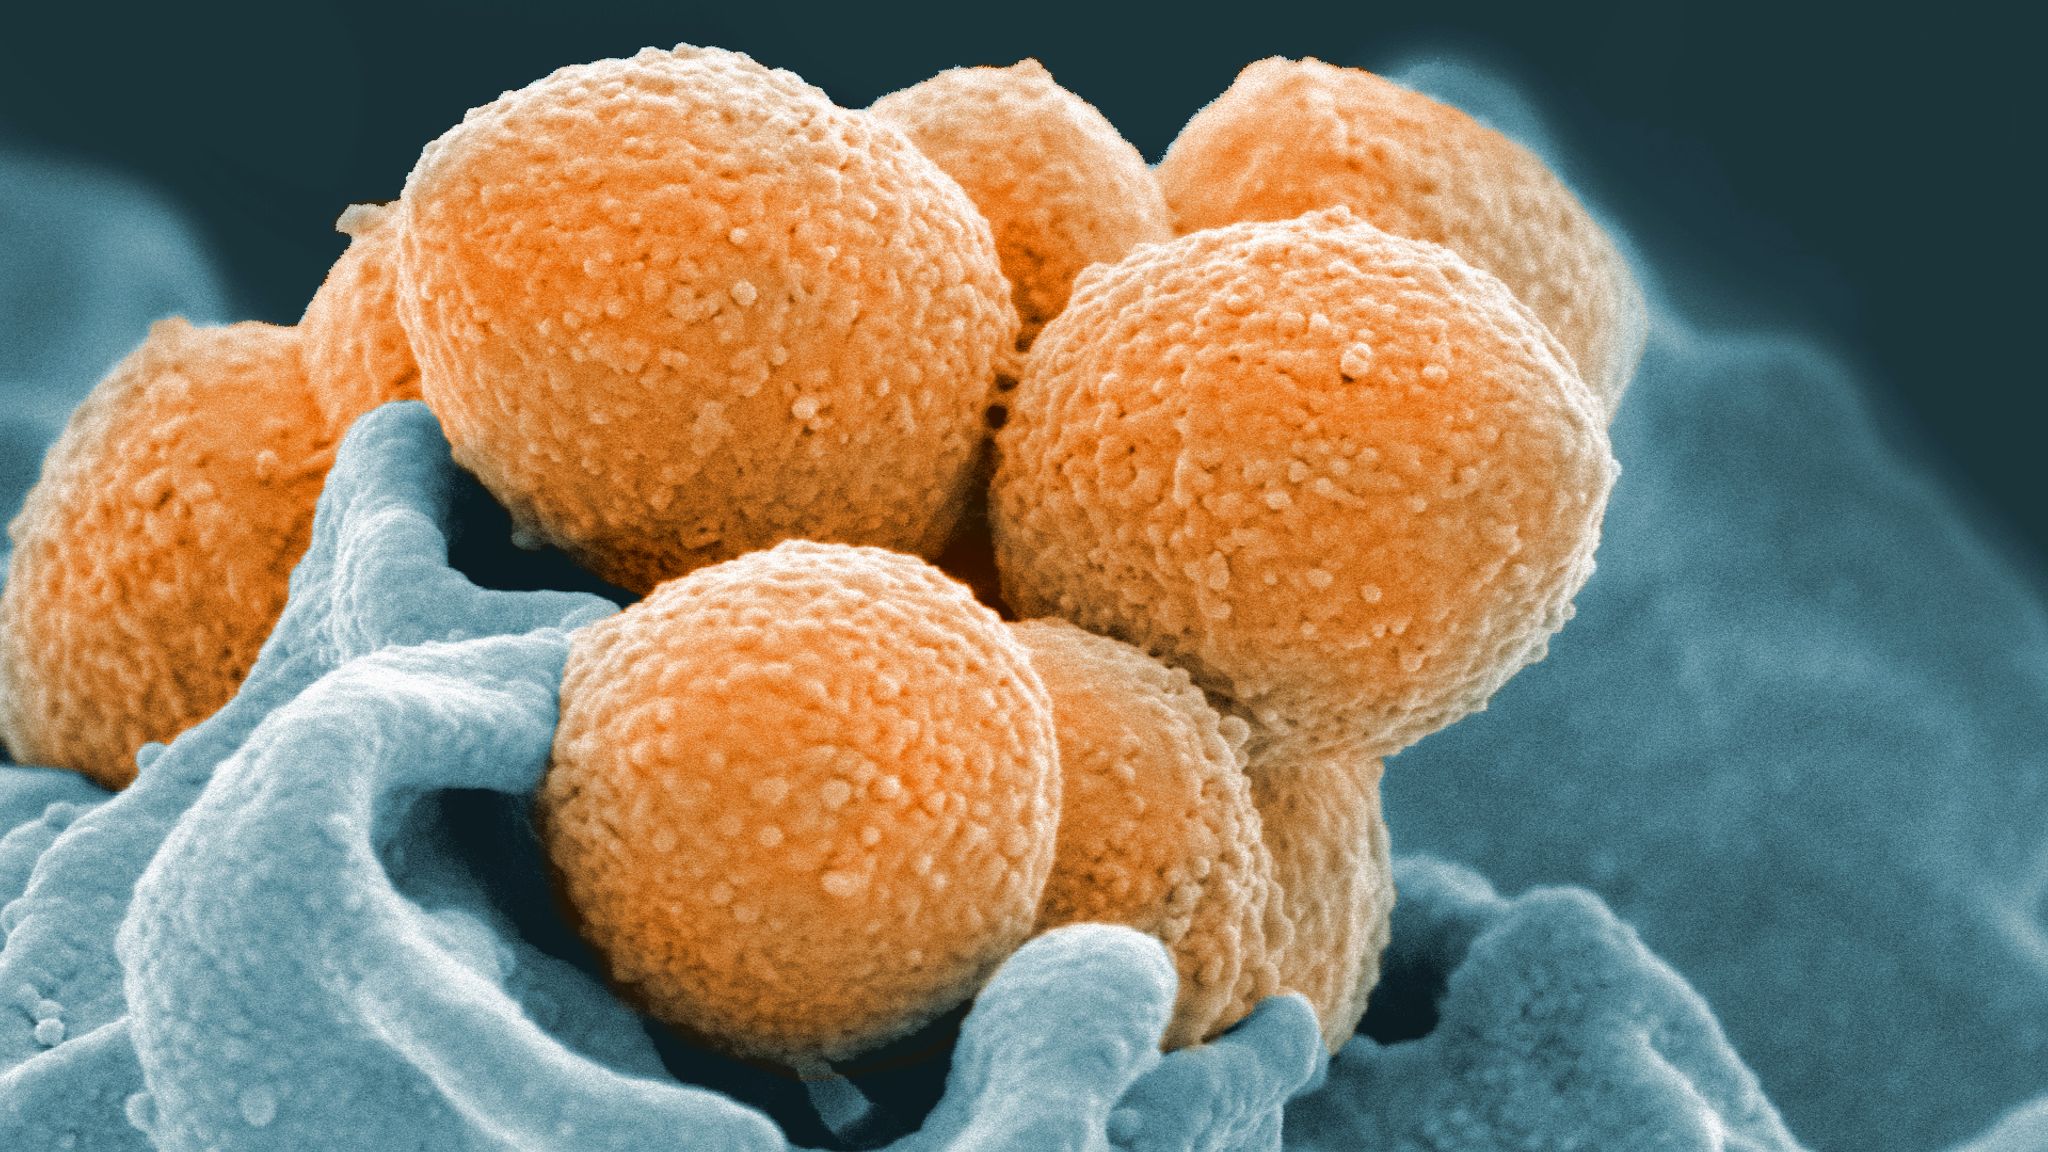 Strep A bacteria can cause the life-threatening Group A Streptococcal disease